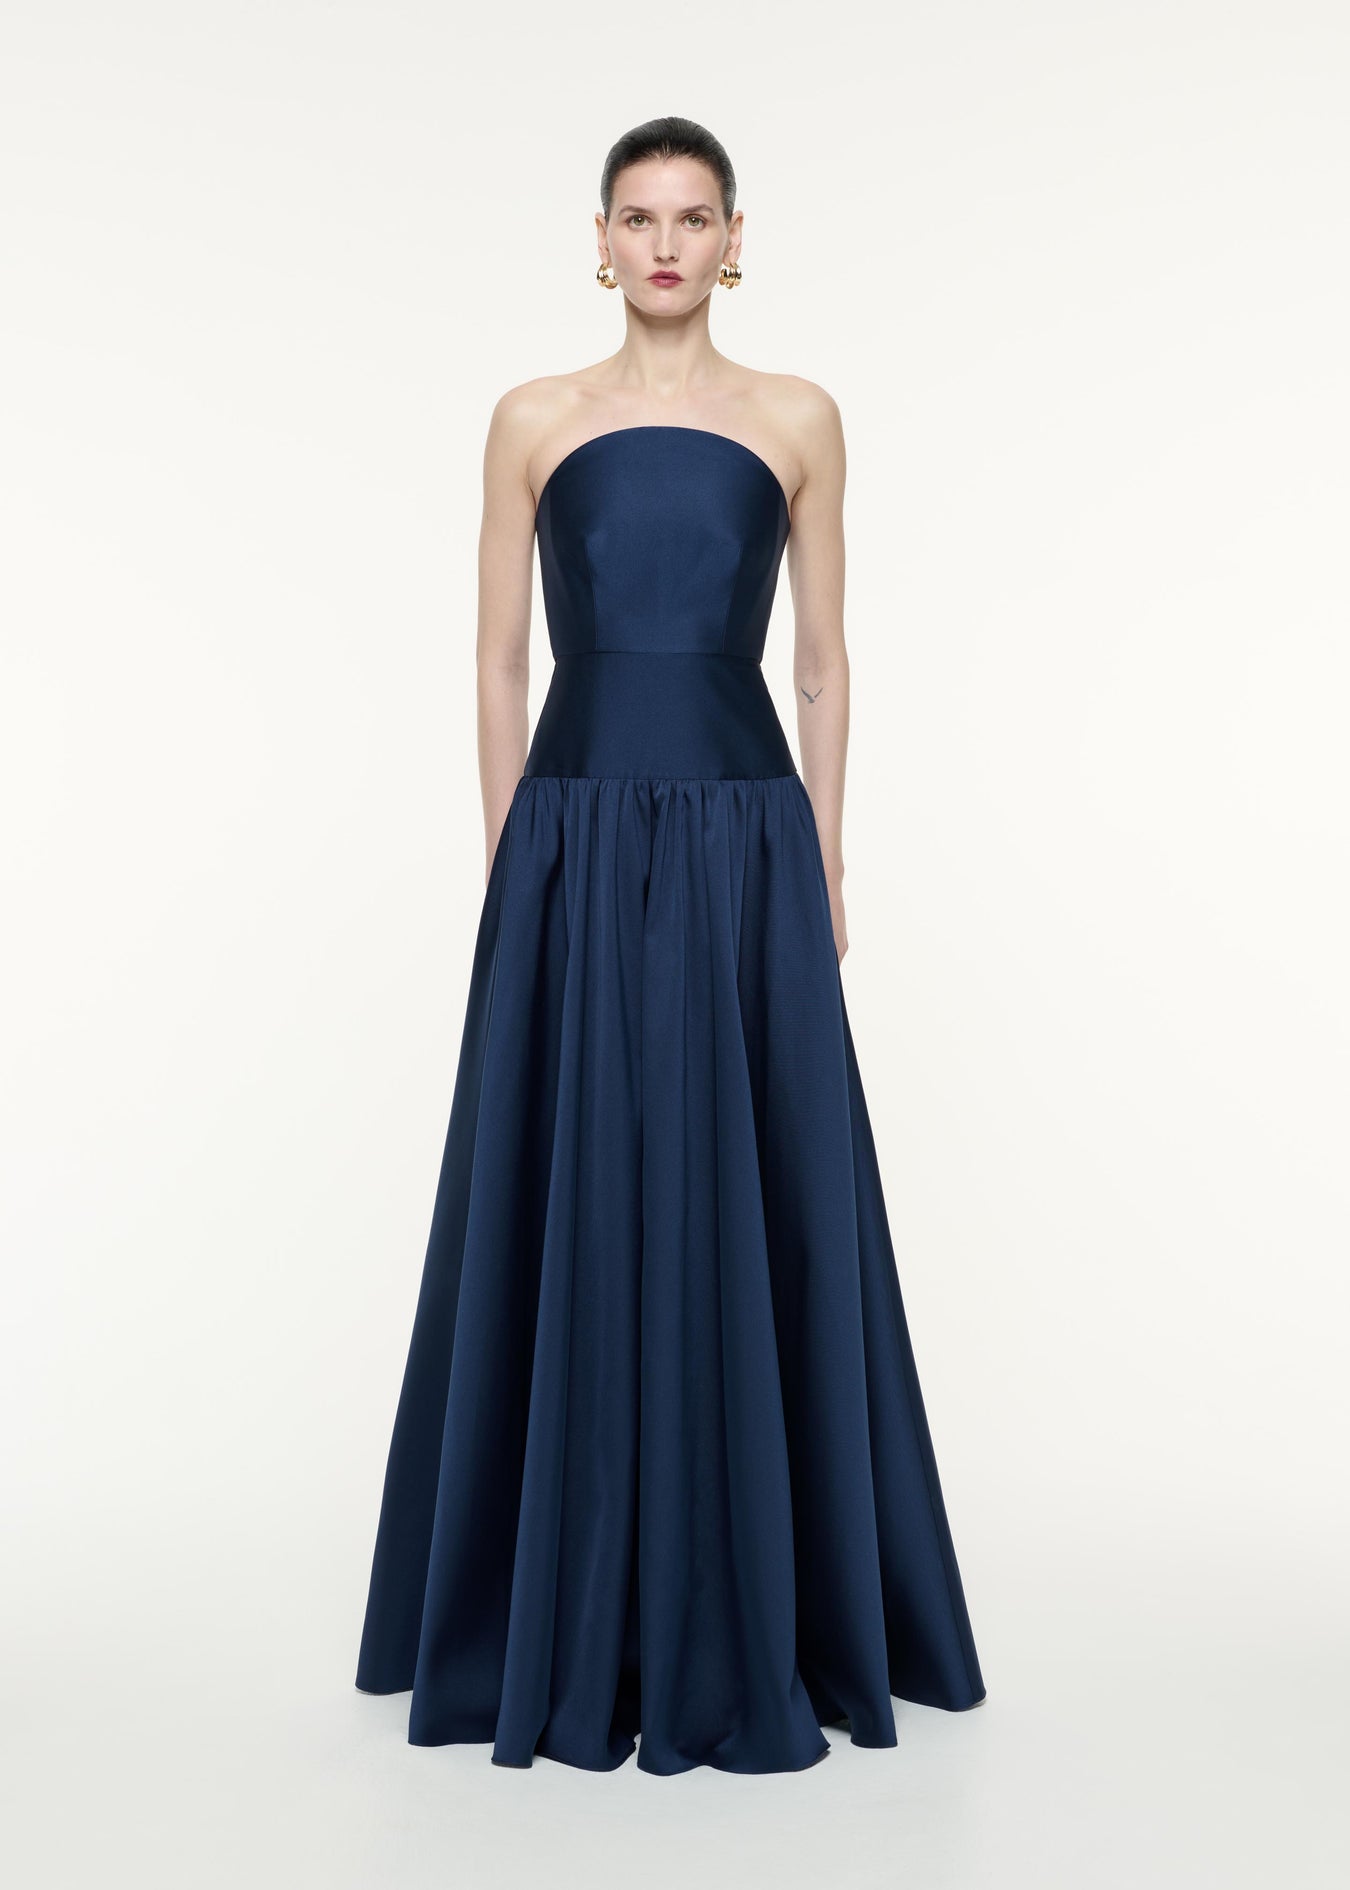 A front view image of a model wearing the Strapless Taffeta Gown in Navy